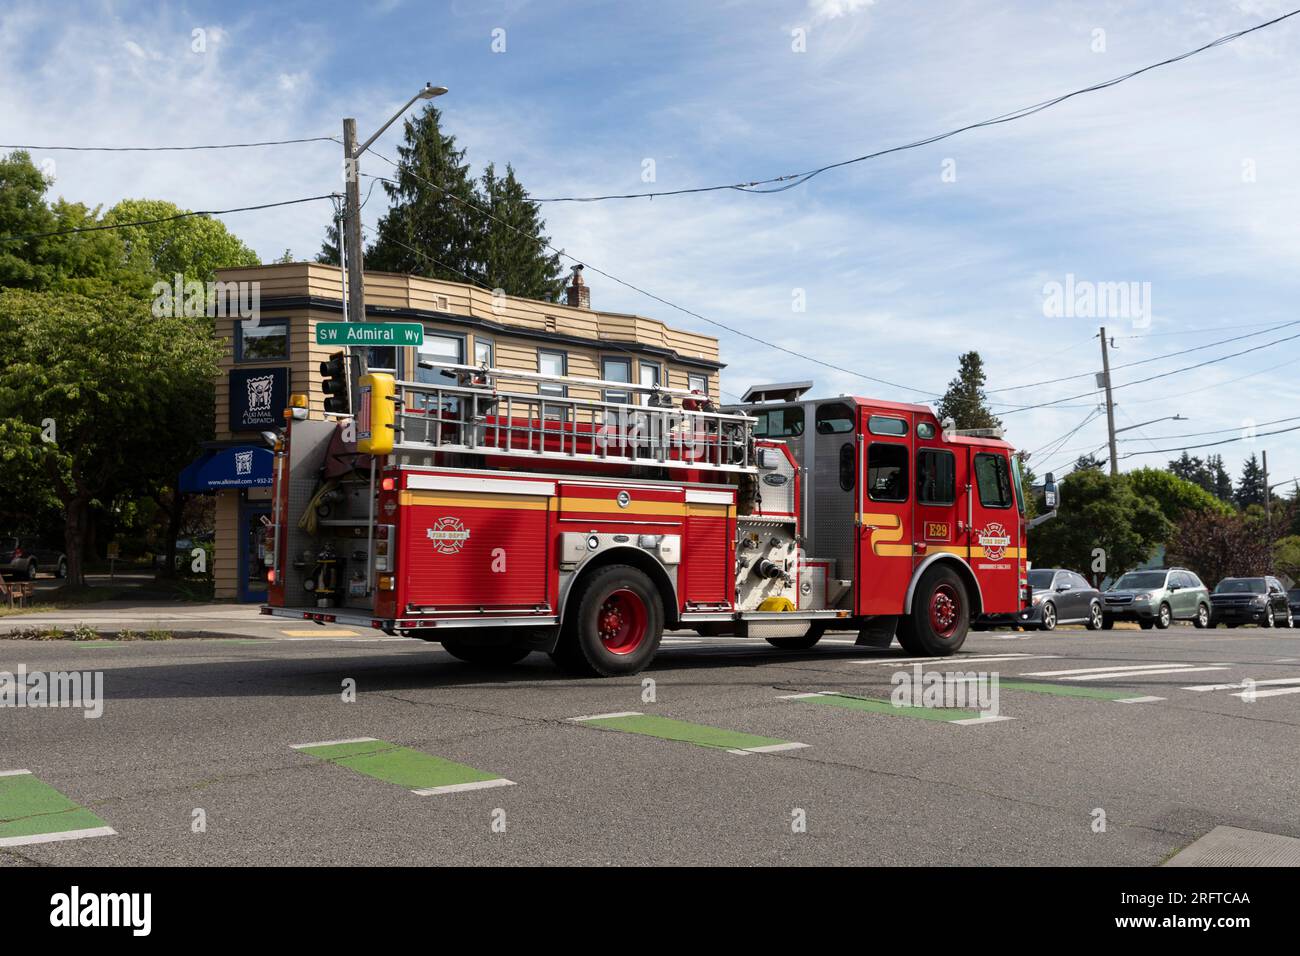 A fire engine from Fire Station 29 responds to an emergency along SW Admiral Way in Seattle’s affluent North Admiral neighborhood. Stock Photo